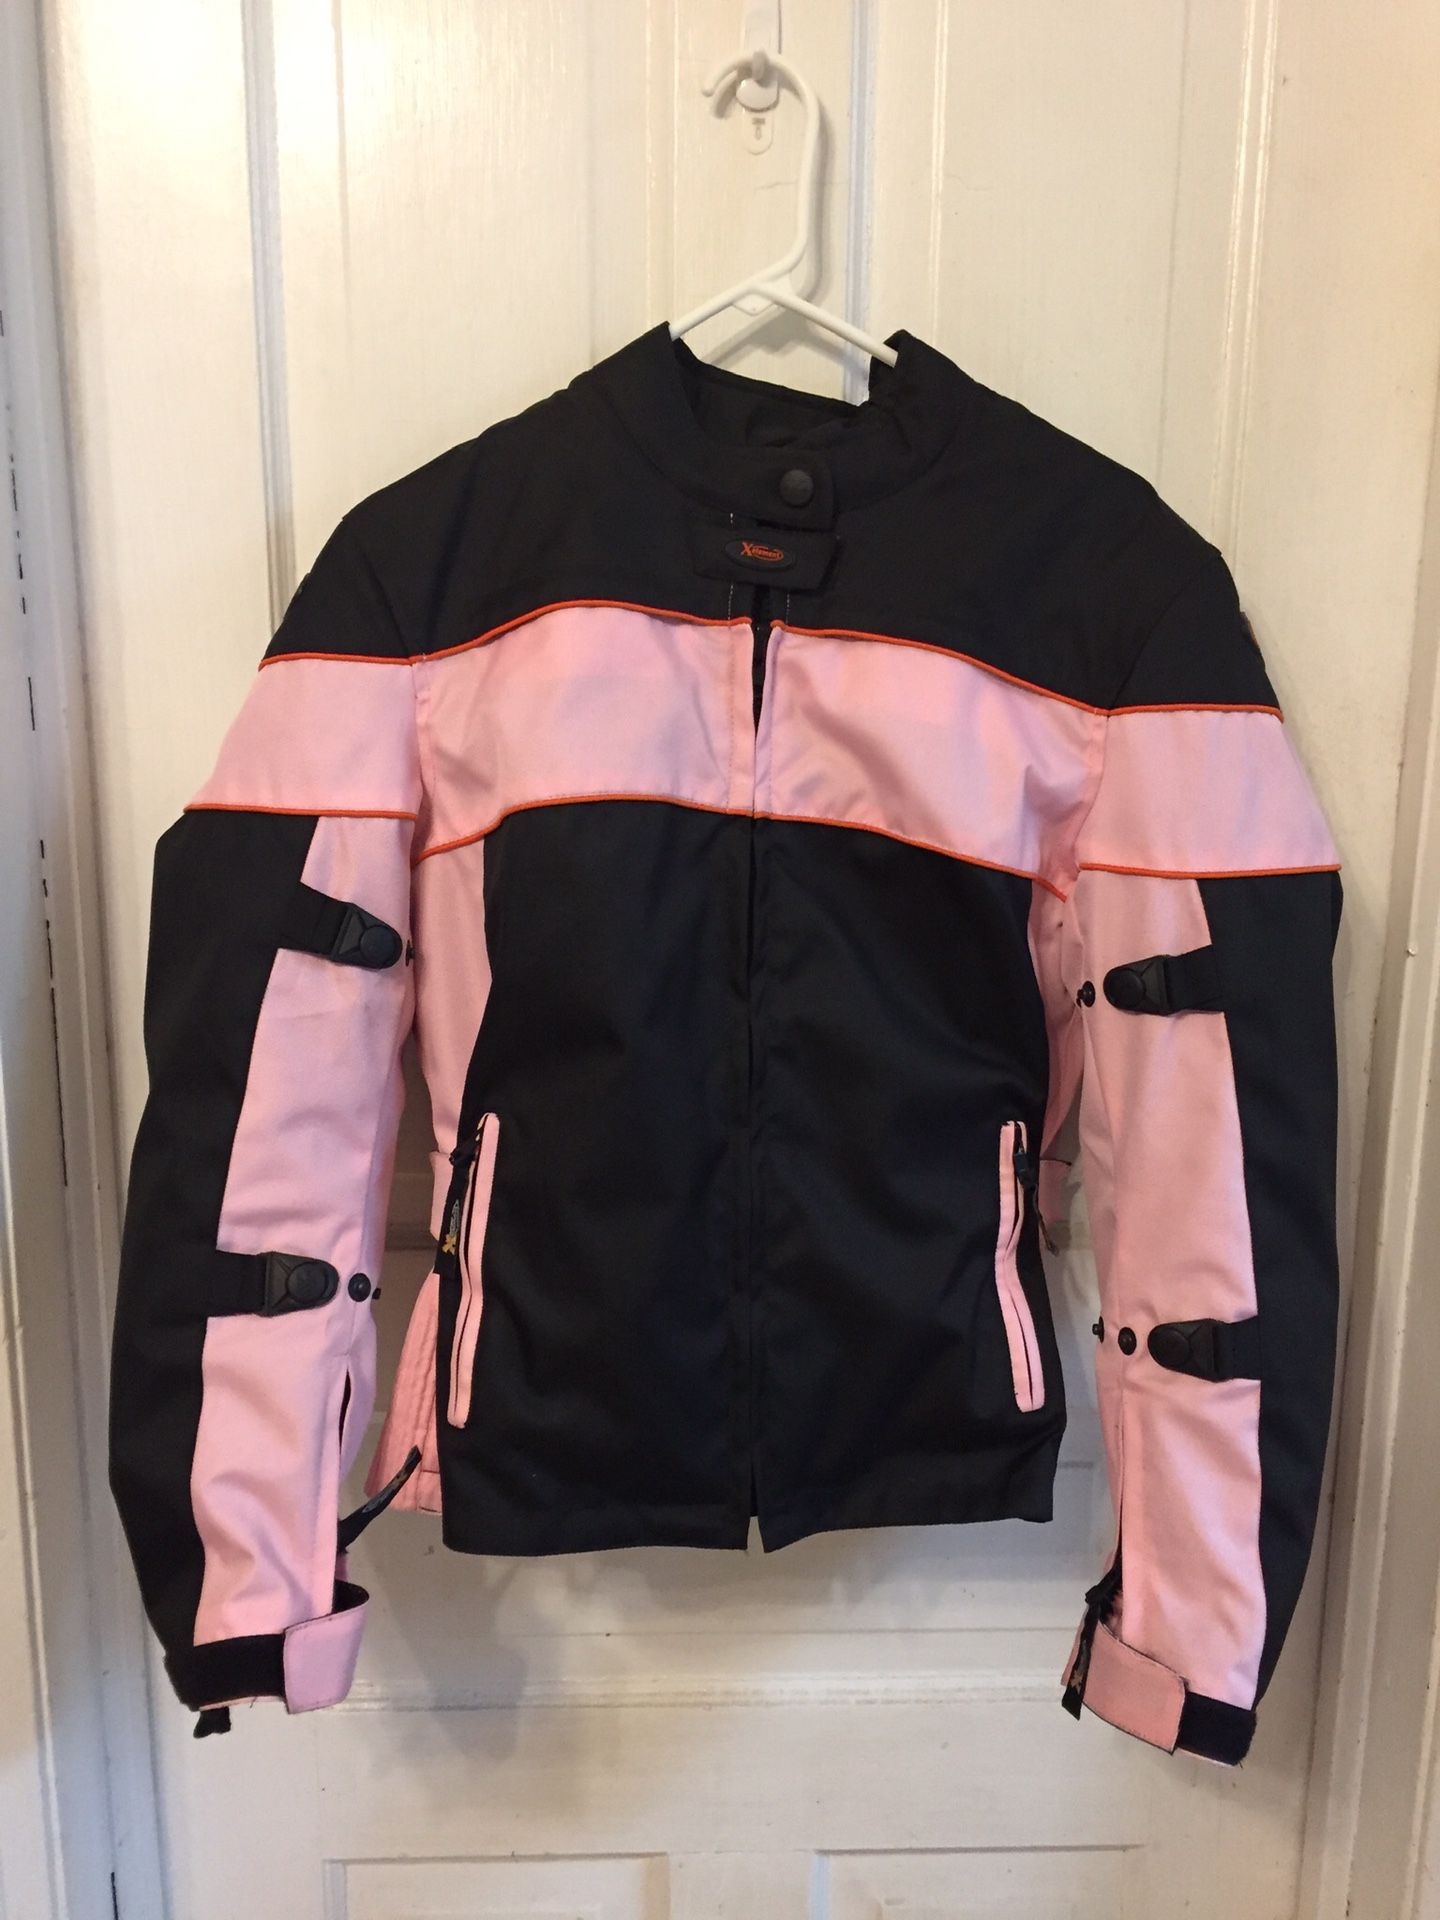 Medium sized women’s motorcycle jacket. Has Level 3 removable armor on shoulders, elbows and back. 100% Tri-Tex material which is waterproof and brea